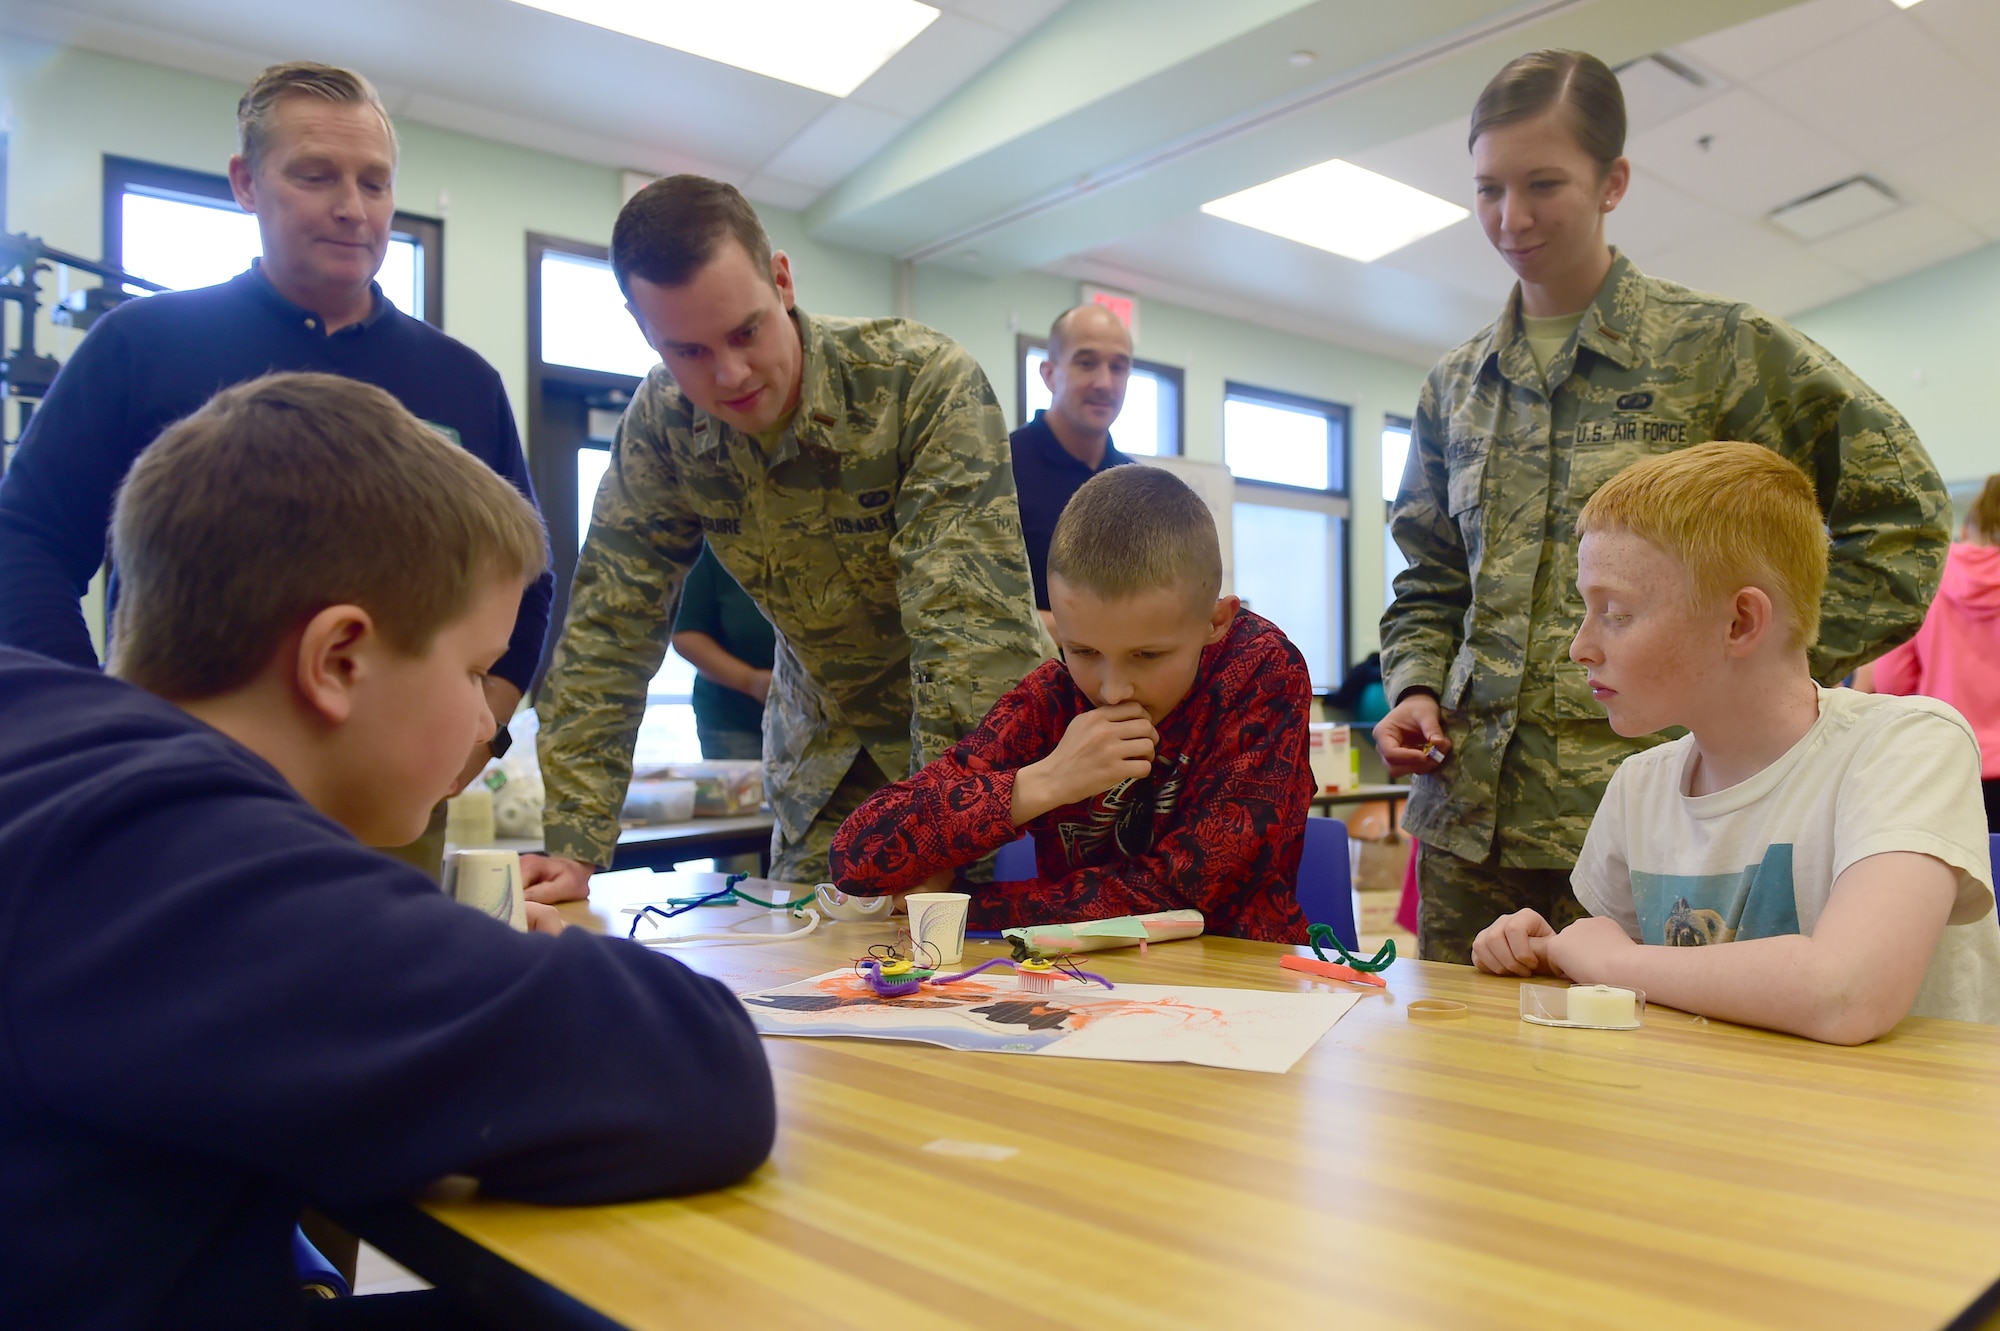 Judges ask children to explain their design during a STEM (Science, Technology, Engineering and Math) Camp project March 31, 2016, at the youth center on Buckley Air Force Base, Colo. The children were tasked with building a structure that could keep a simulated oil spill contained. (U.S. Air Force photo by Airman 1st Class Luke W. Nowakowski/Released)